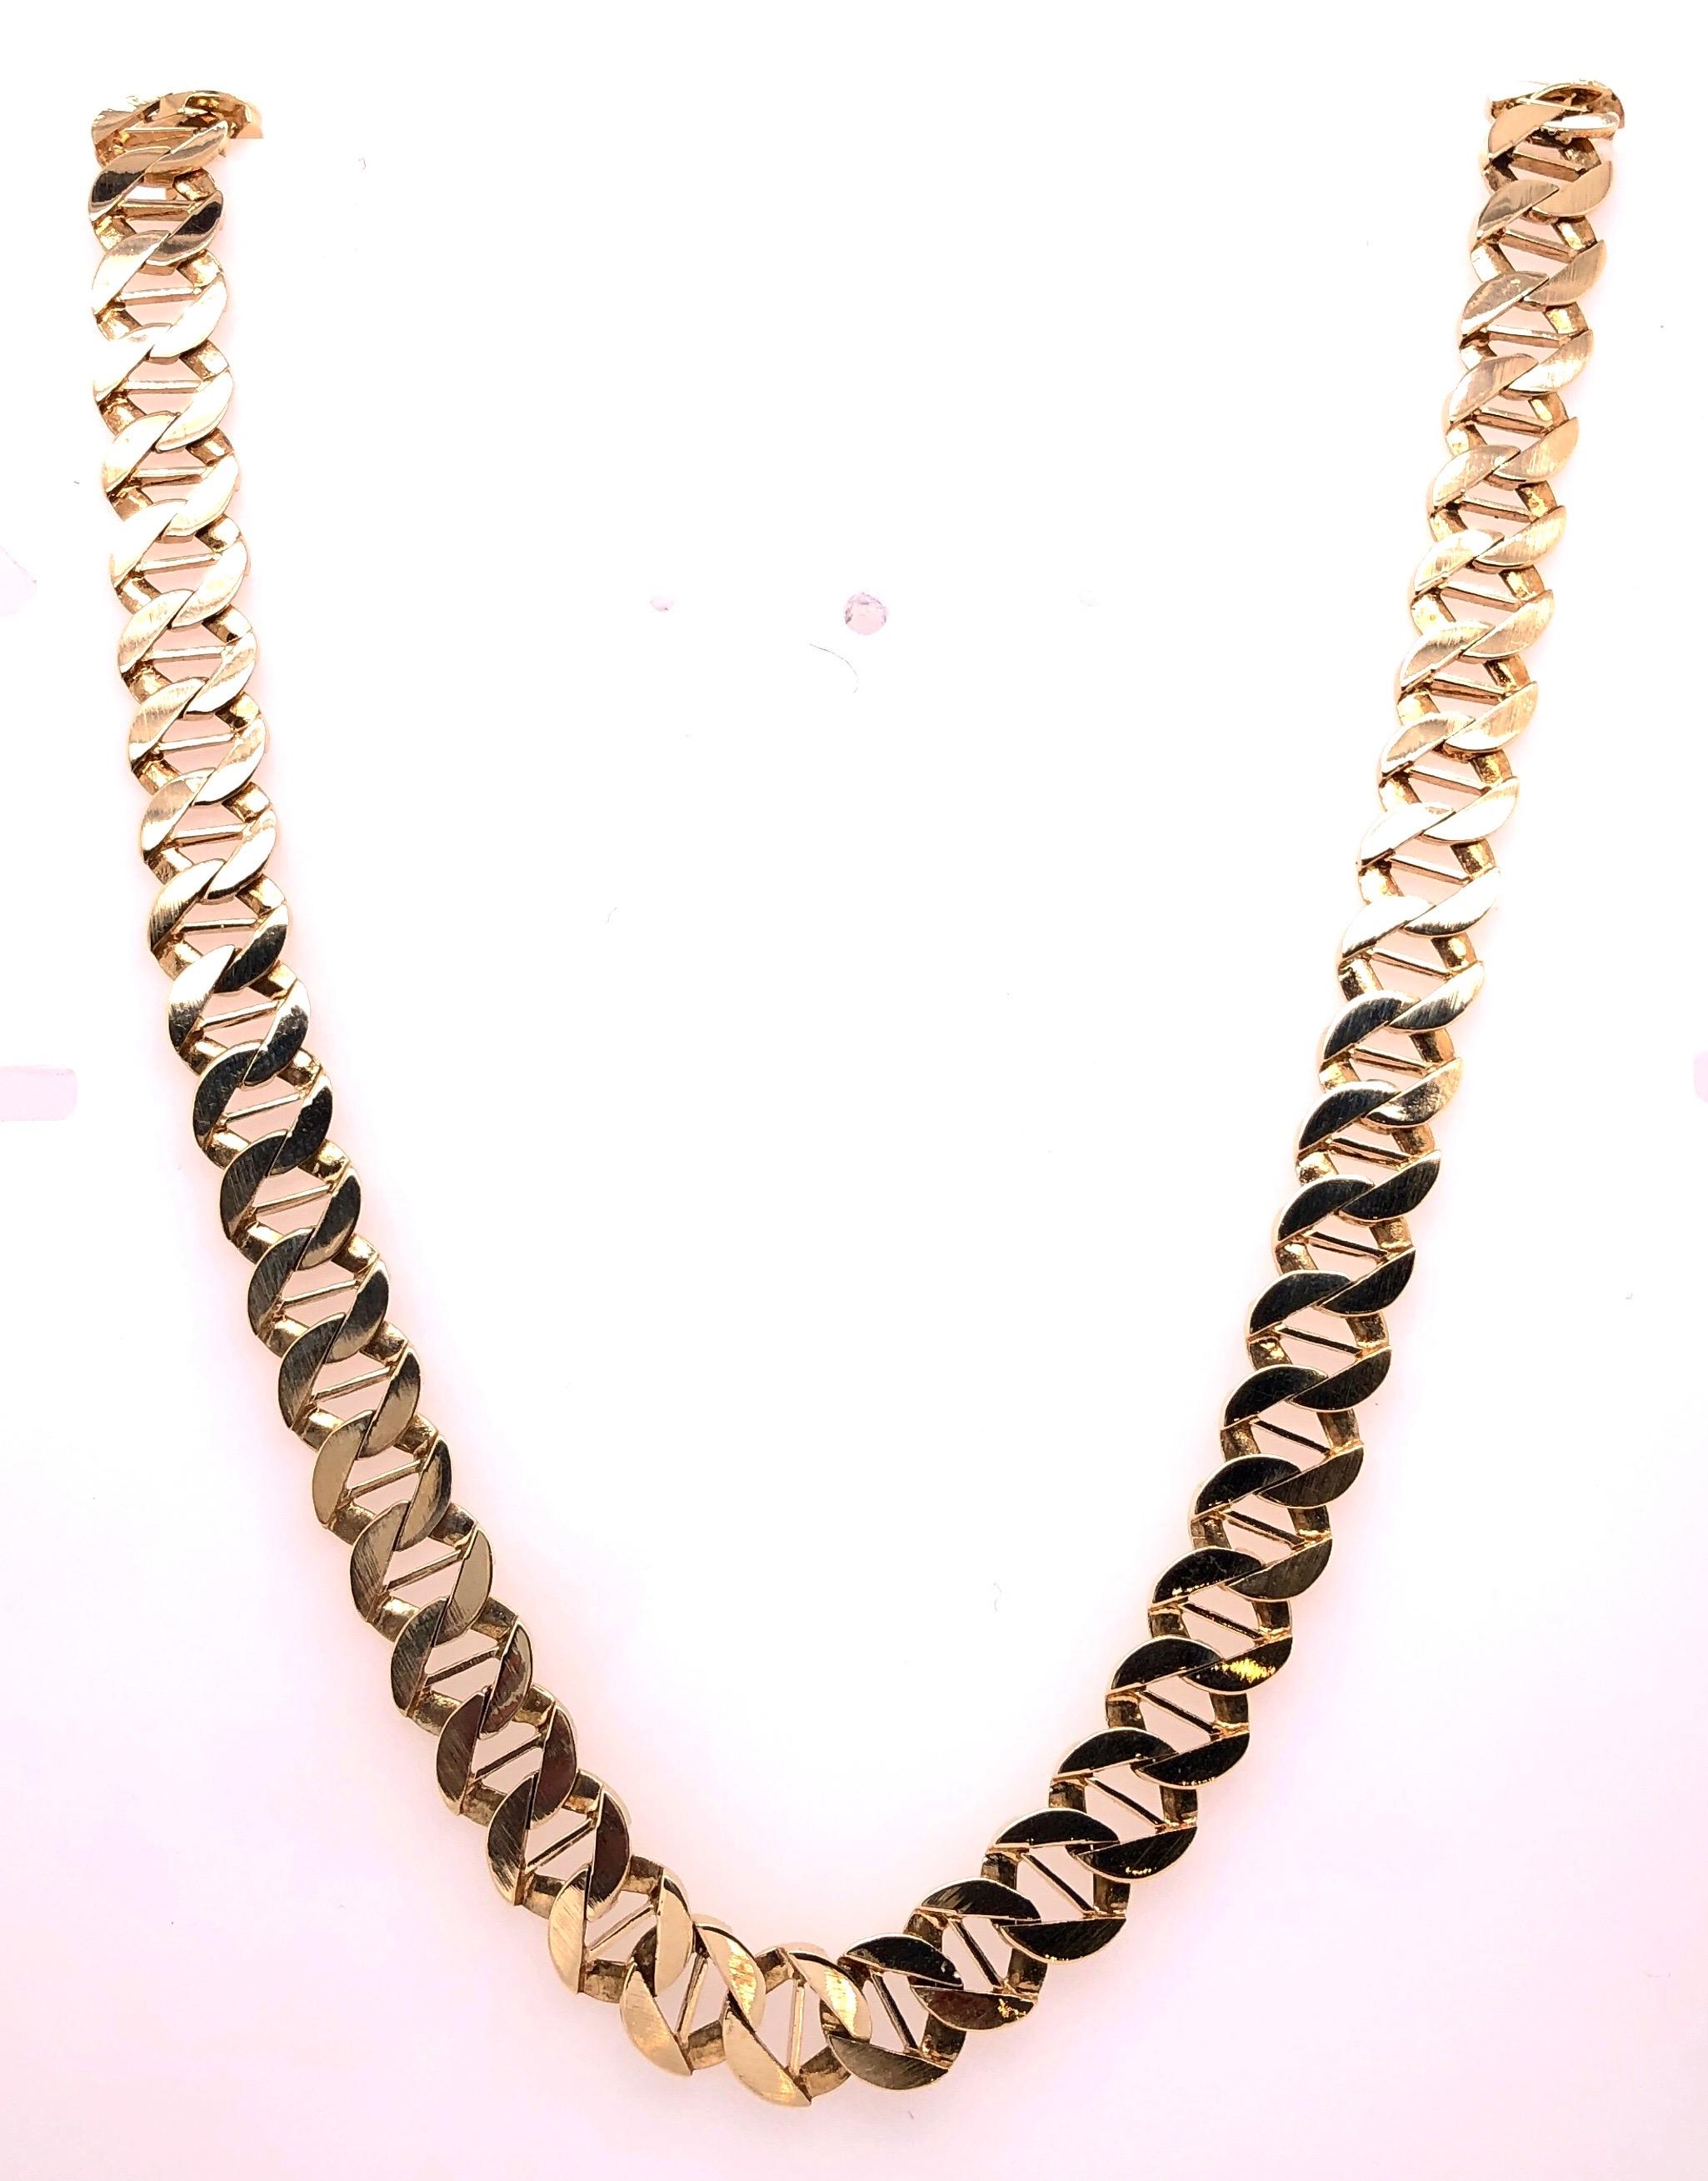 14Kt Yellow Gold 24 inch Fancy Link Necklace.
43 grams total weight